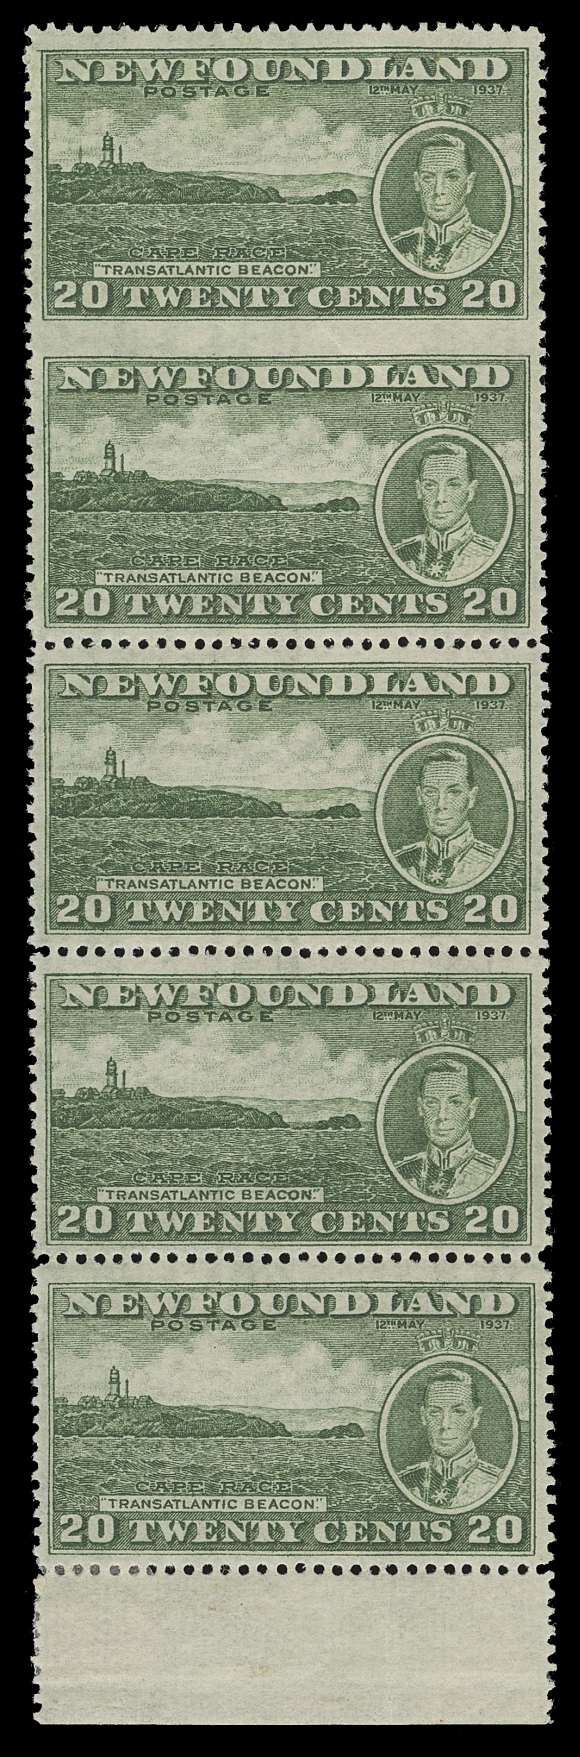 THE AFAB COLLECTION - NEWFOUNDLAND 1897-1947 ISSUES  240a, ii,A spectacular mint vertical strip of five, sheet margin at foot, unusually well centered for the issue, top pair displaying both the "Extra Smokestack" constant plate variety (Pos. 55) as well as being and imperforate between - AN EXTREMELY RARE COMBINATION, we would not be surprised if this is the only such pair in existence, XF LHProvenance: Graham Cooper, Spink, December 2016; Lot 736ONE OF THE MOST IMPORTANT NEWFOUNDLAND KING GEORGE VI VARIETIES, IDEAL FOR AN EXHIBIT COLLECTION.